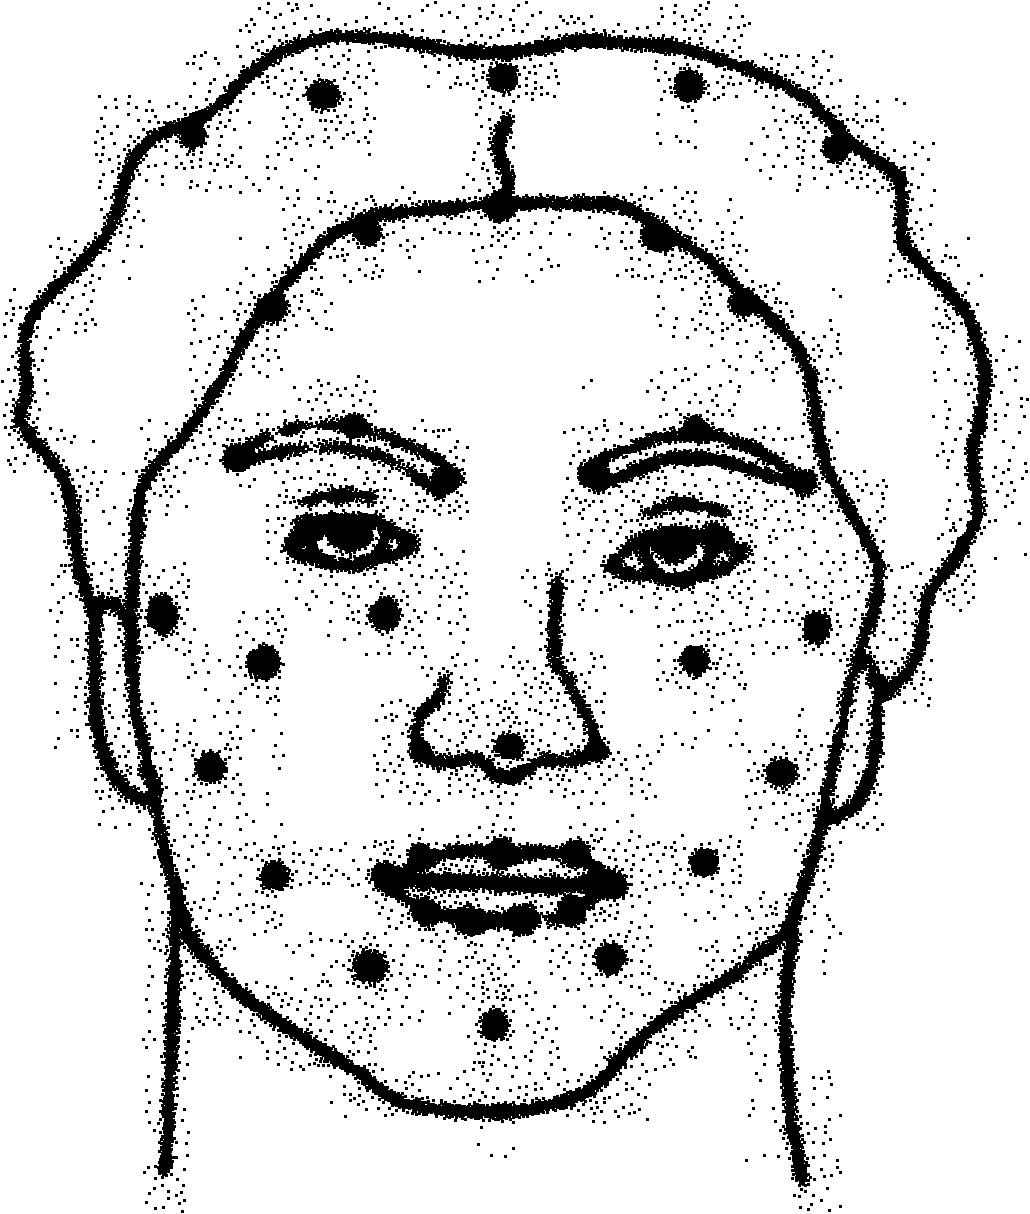 Data driving face expression synthesis method based on Laplace transformation